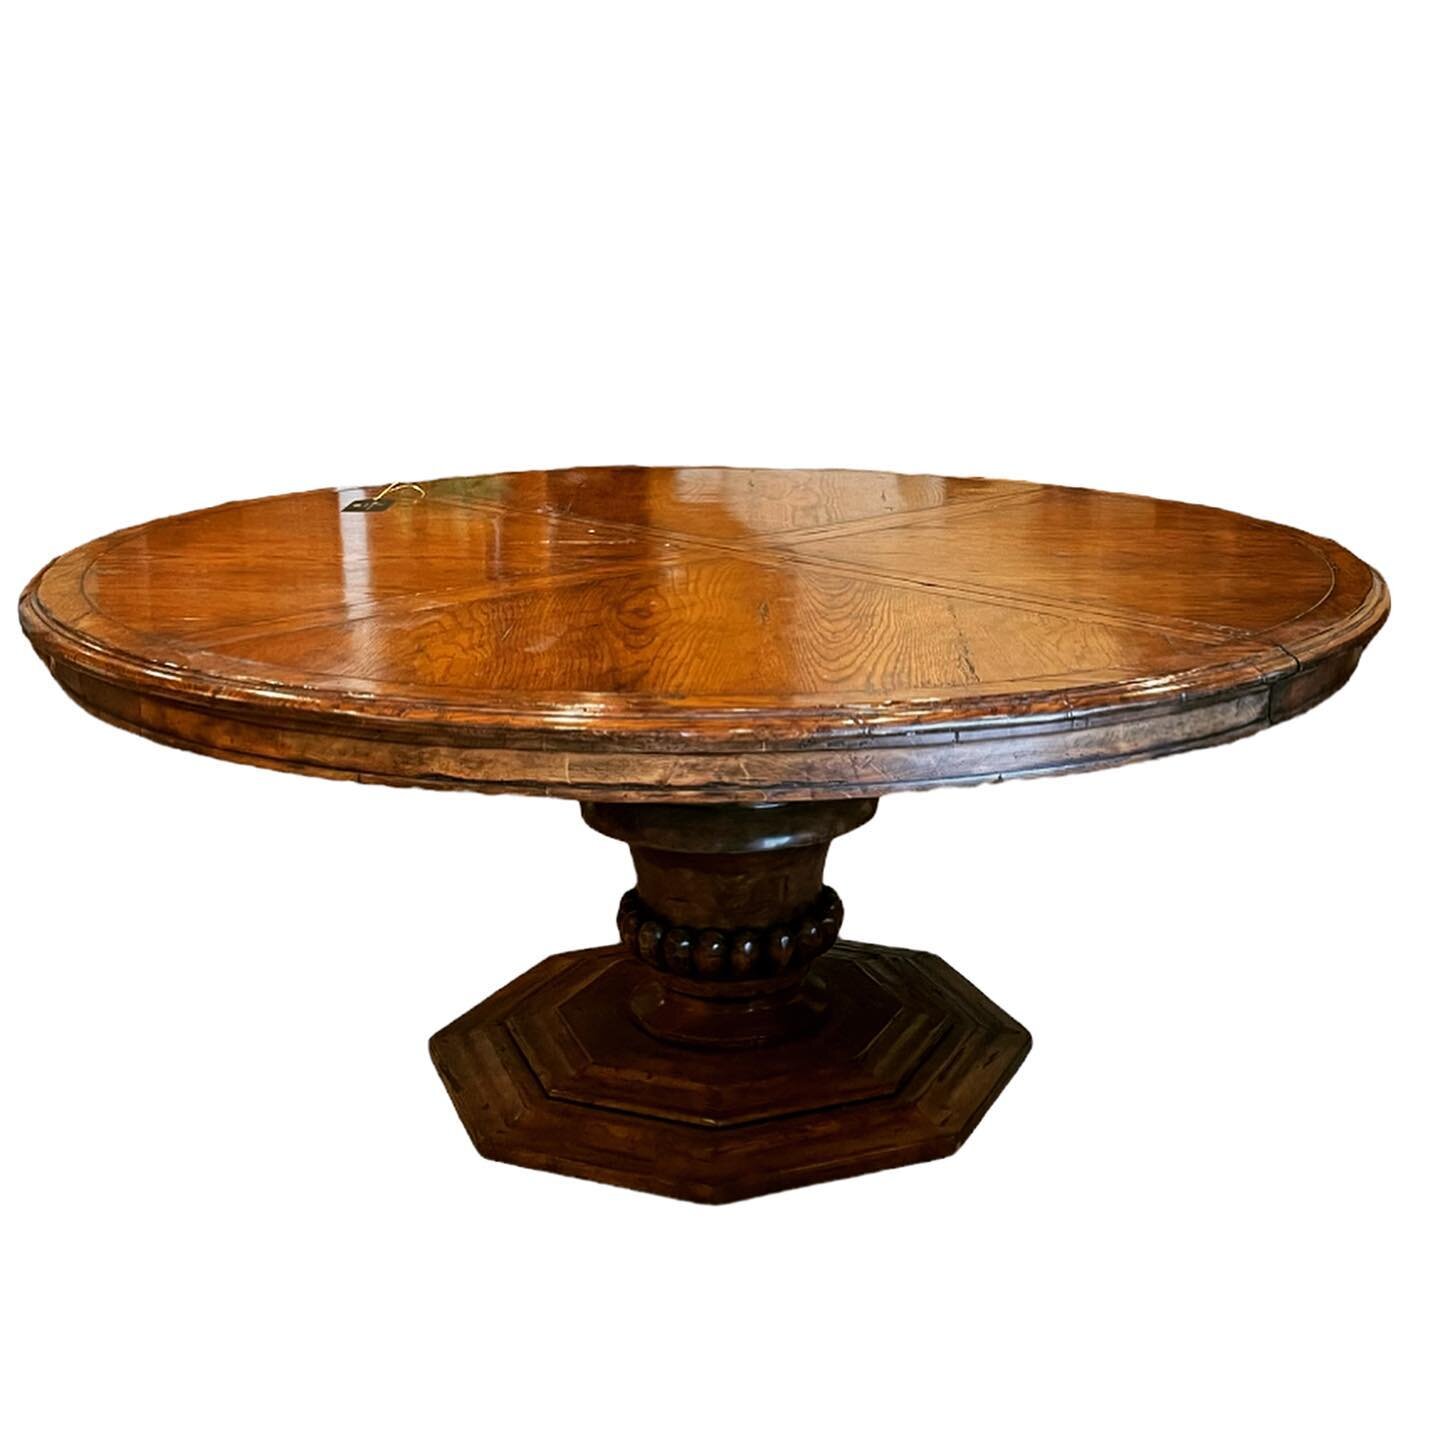 Searching for a 72&rdquo; Table?  This solid Distressed Oak Table has a beautifully carved octagonal pedestal base PLUS an 18&rdquo; leaf to create a generous oval &amp; accommodate two more guests! $2895-30% sale = $2025 ready for pick up!